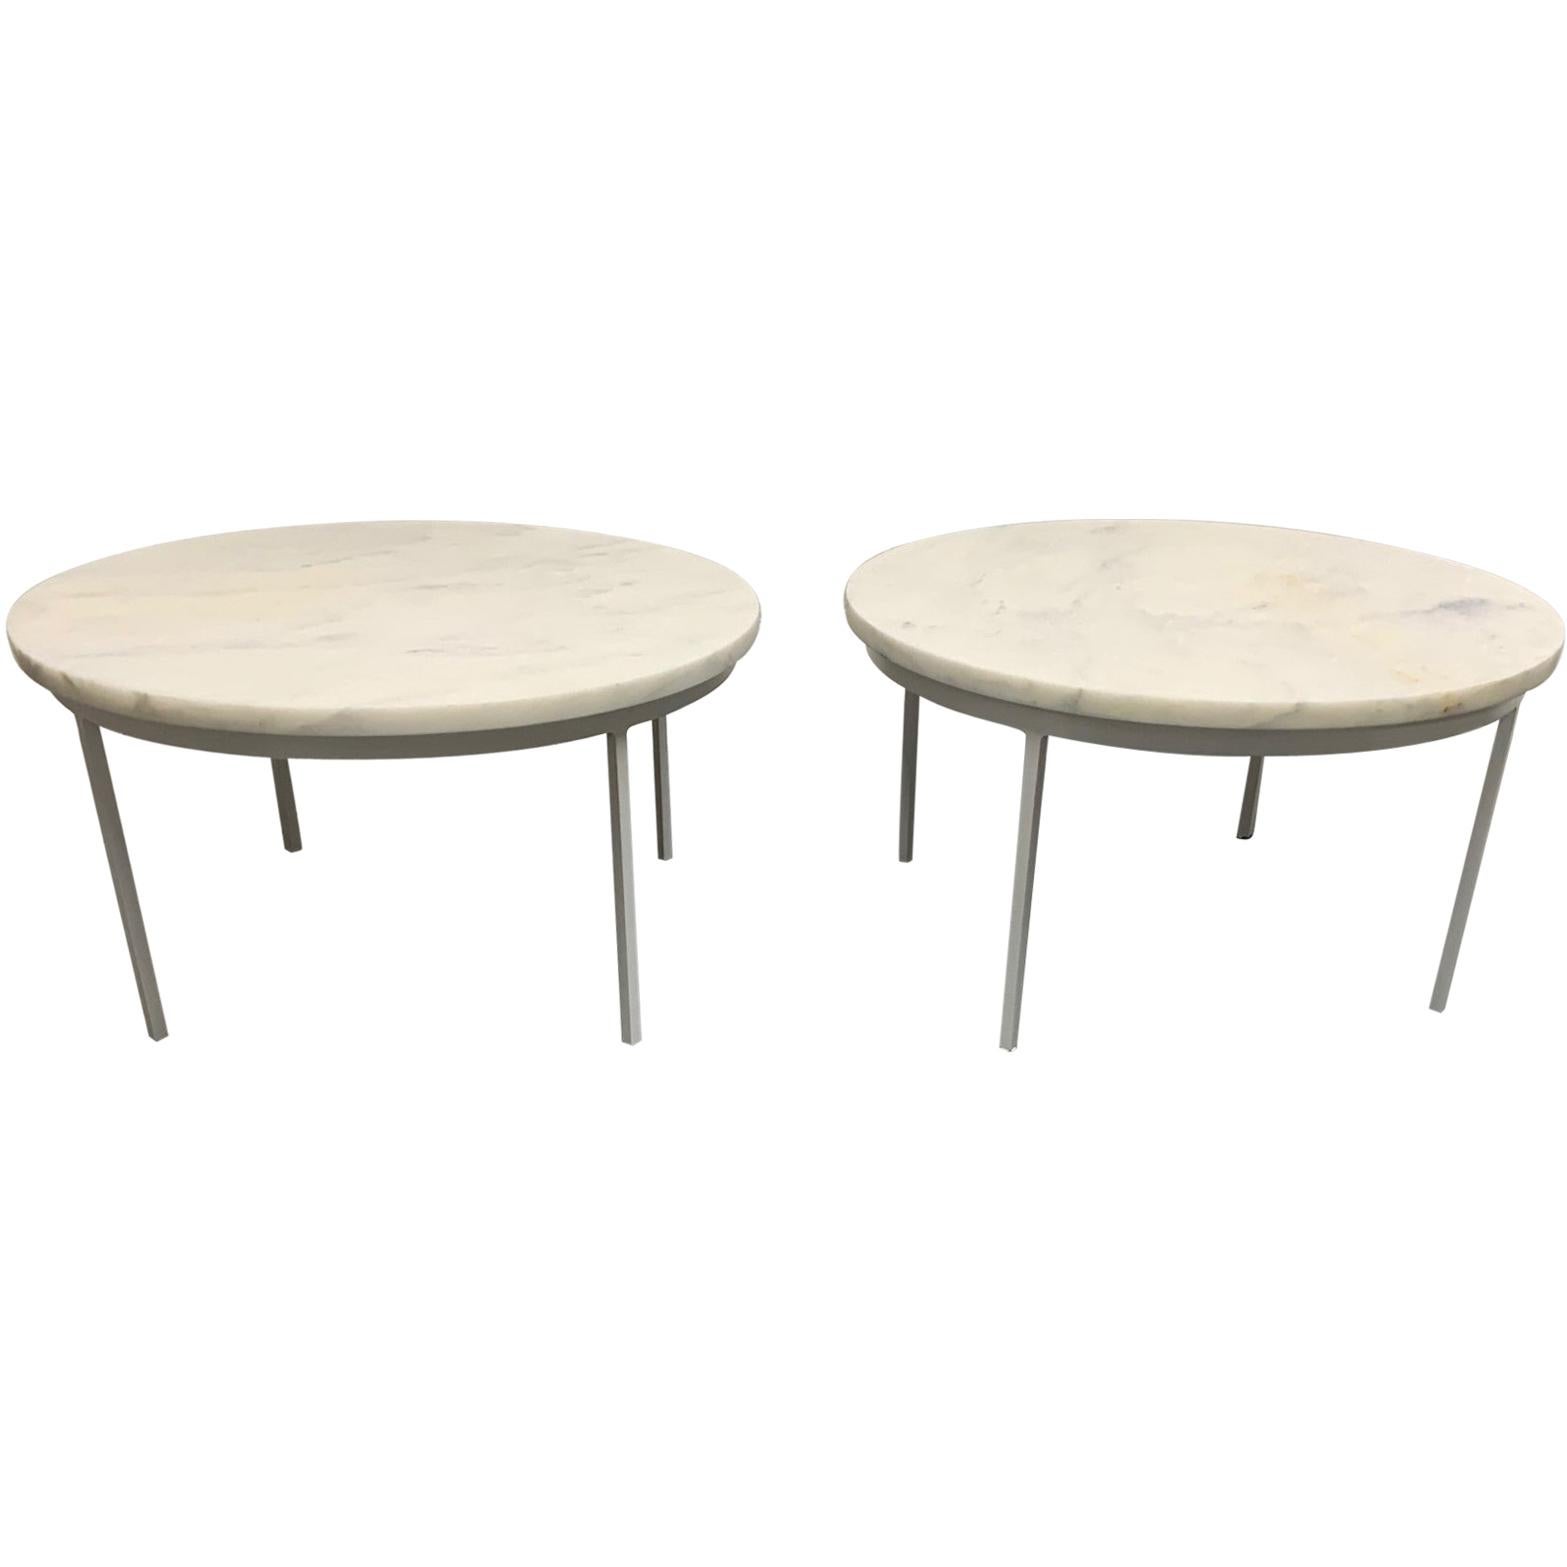 Pair of Nicos Zographos Carrara Marble Top Tables For Sale